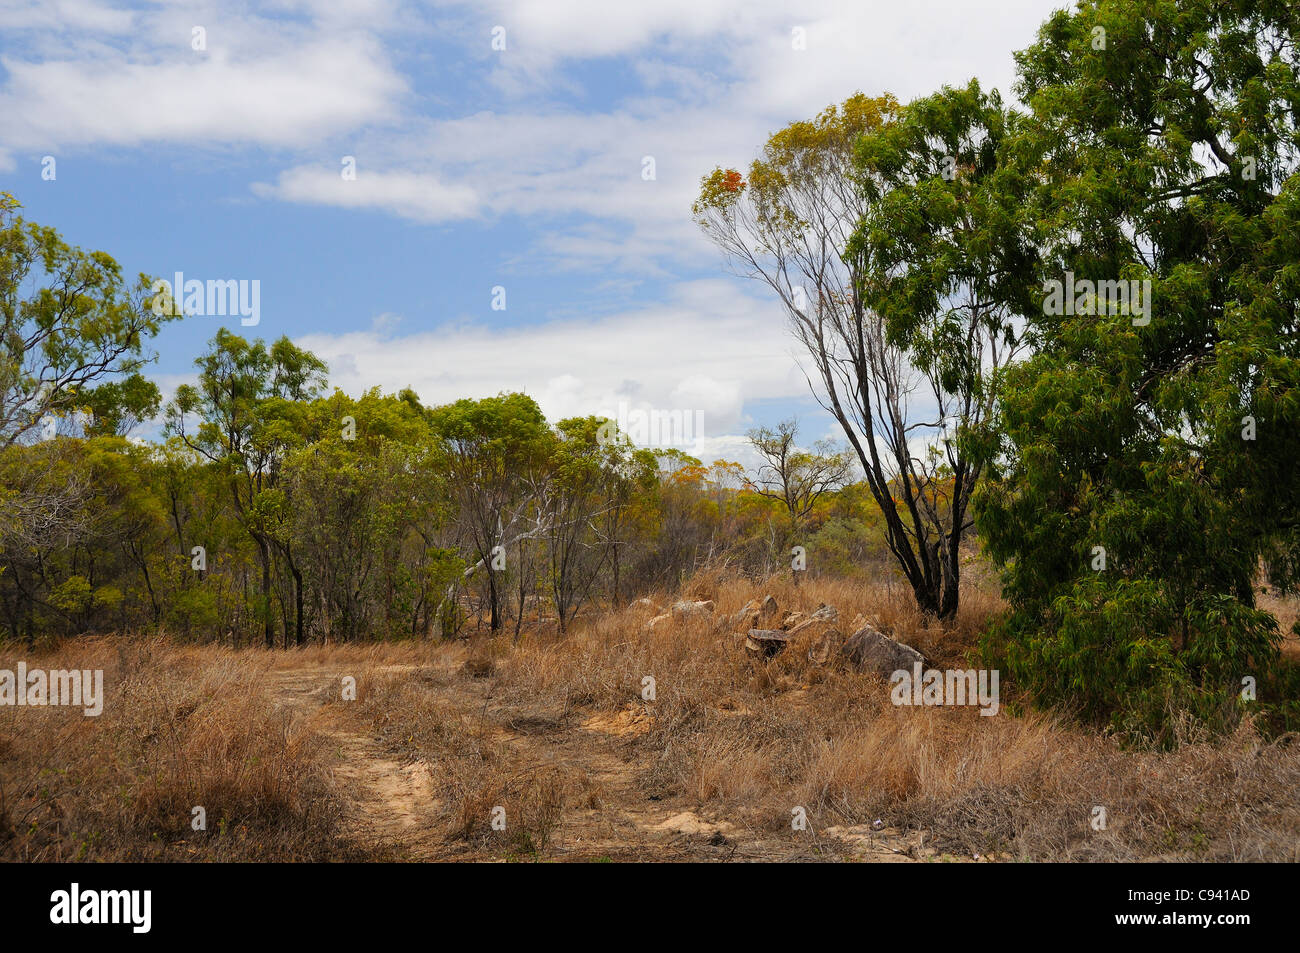 Typical Australian landscape of scrub, trees and baked earth Queensland, Australia Stock Photo